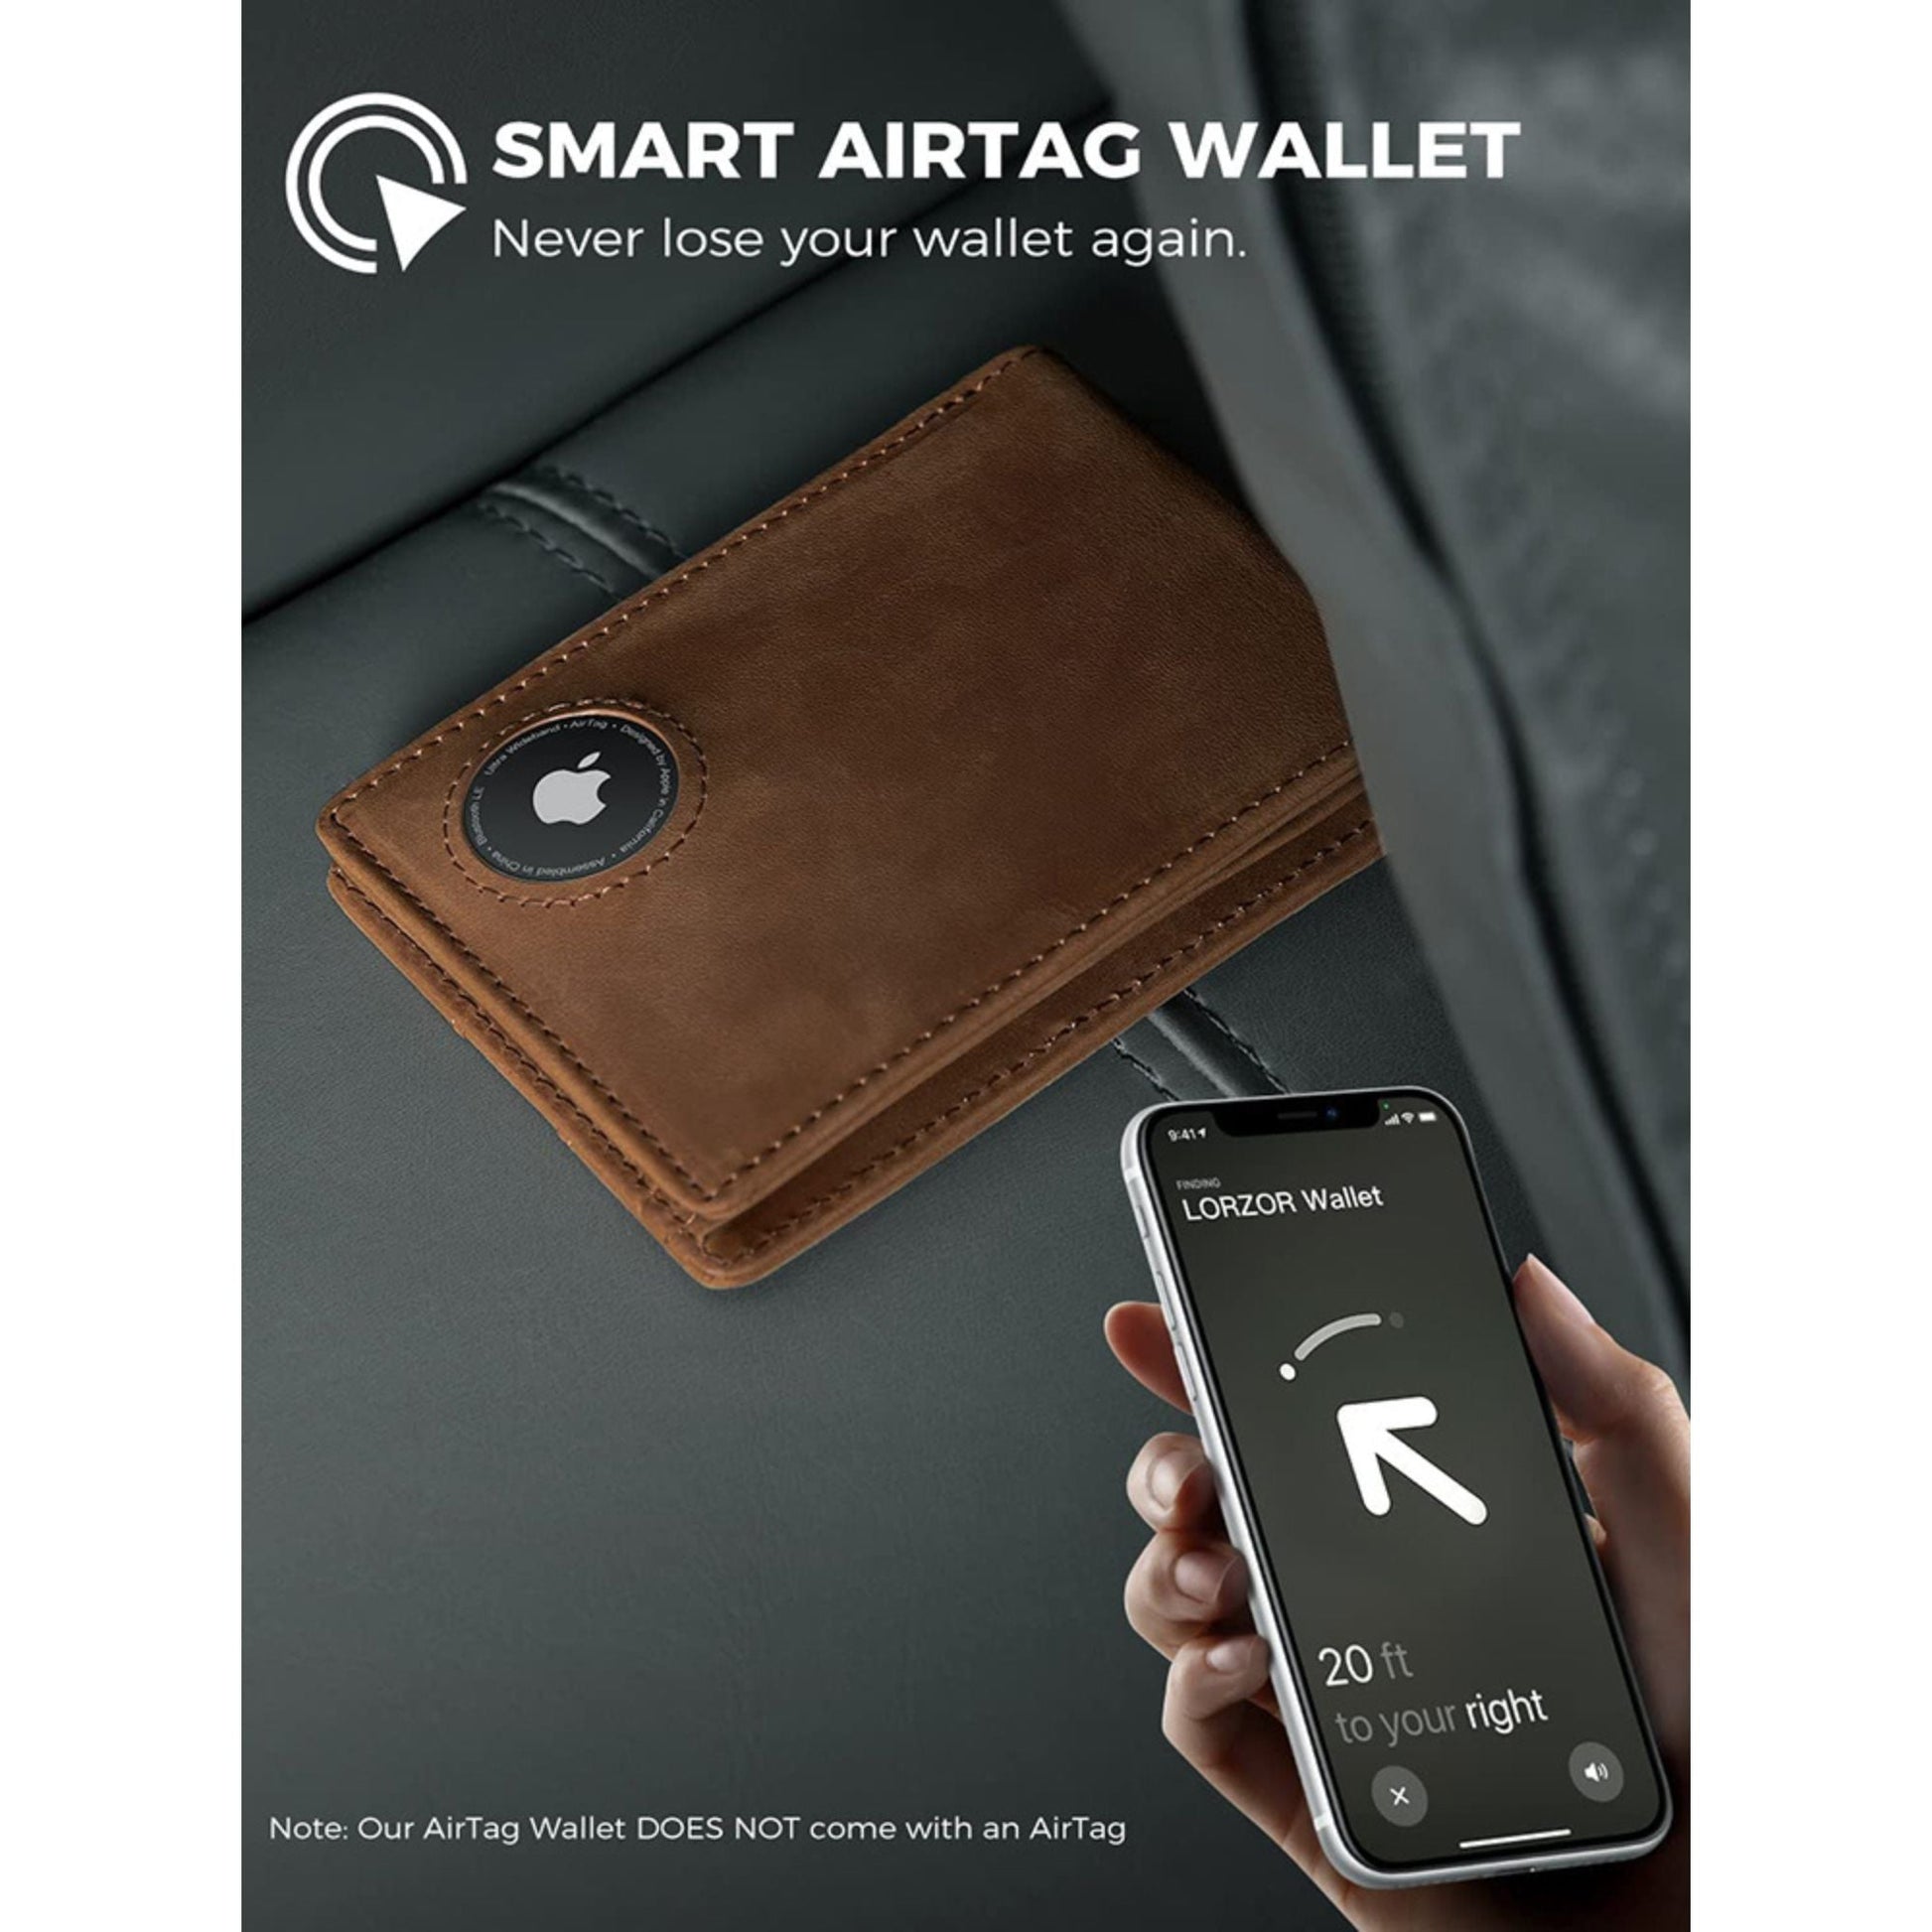 2-wallet with apple airtag - airtag for wallet - mens wallet with airtag - airtag card holder - best air tag wallet - airtag wallet holder - wallet with air tag - wallet for airtag - wallet with airtag holder - leather airtag wallet - 2-wallet with apple airtag - airtag for wallet - mens wallet with airtag - airtag card holder - best air tag wallet - airtag wallet holder - wallet with air tag - wallet for airtag - wallet with airtag holder - leather airtag wallet